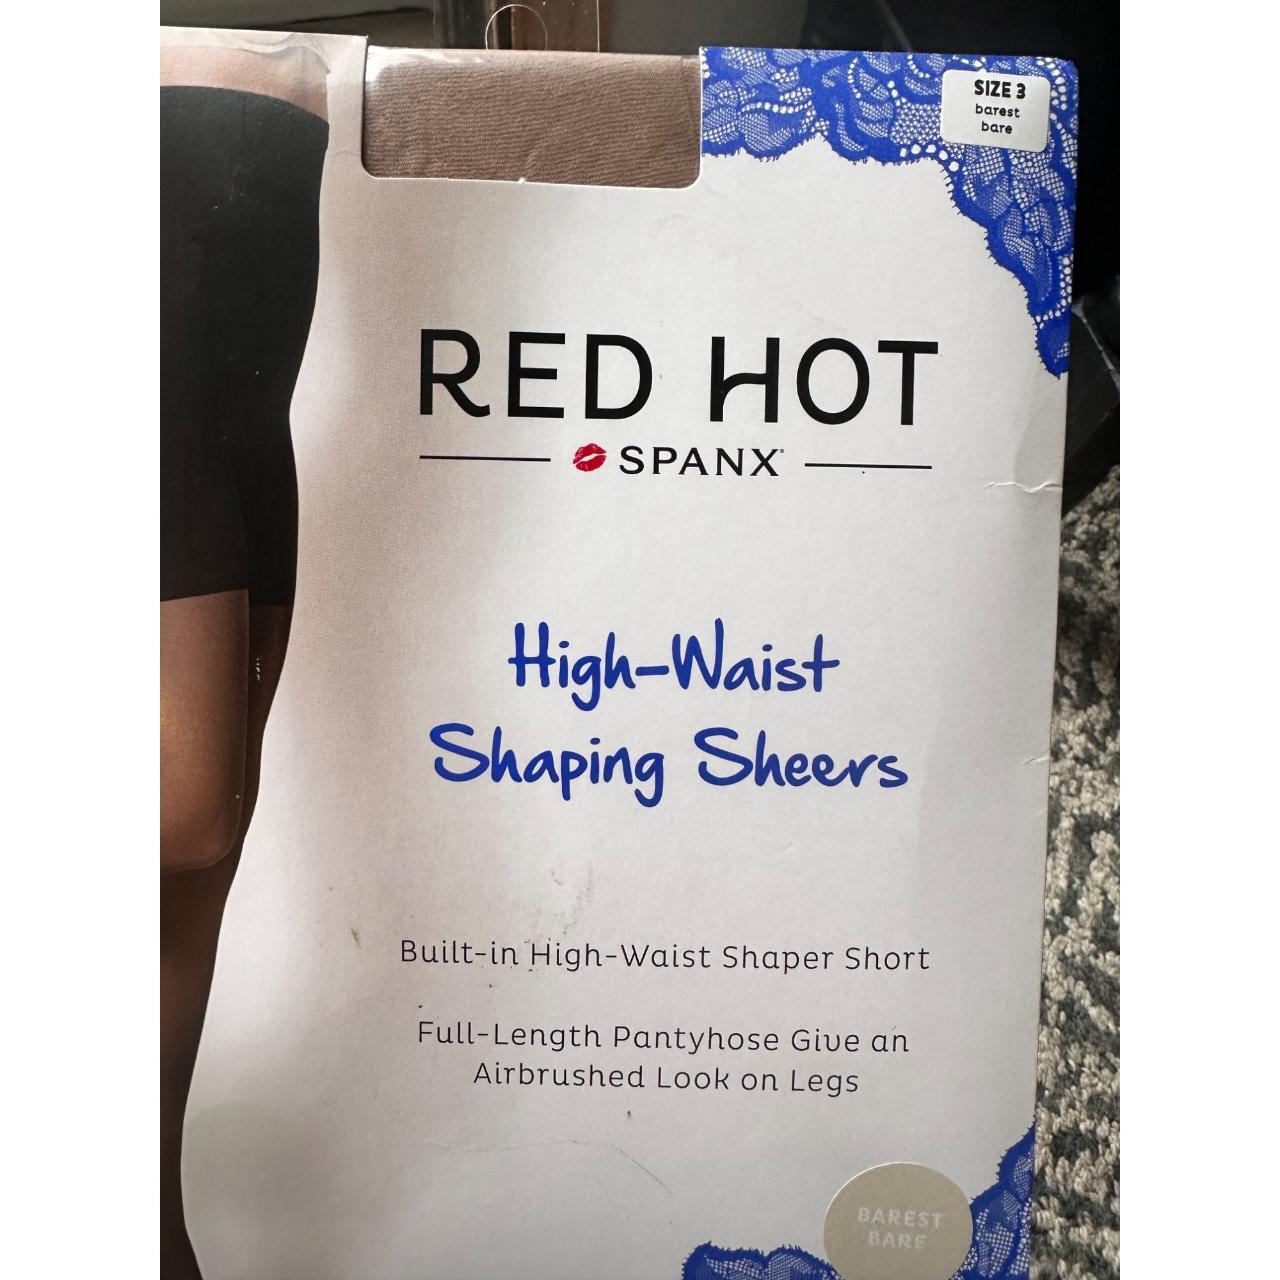 Red Hot SPANX High-Waist Shaping Sheers Size 4 Barest Bare Brand New in  Package